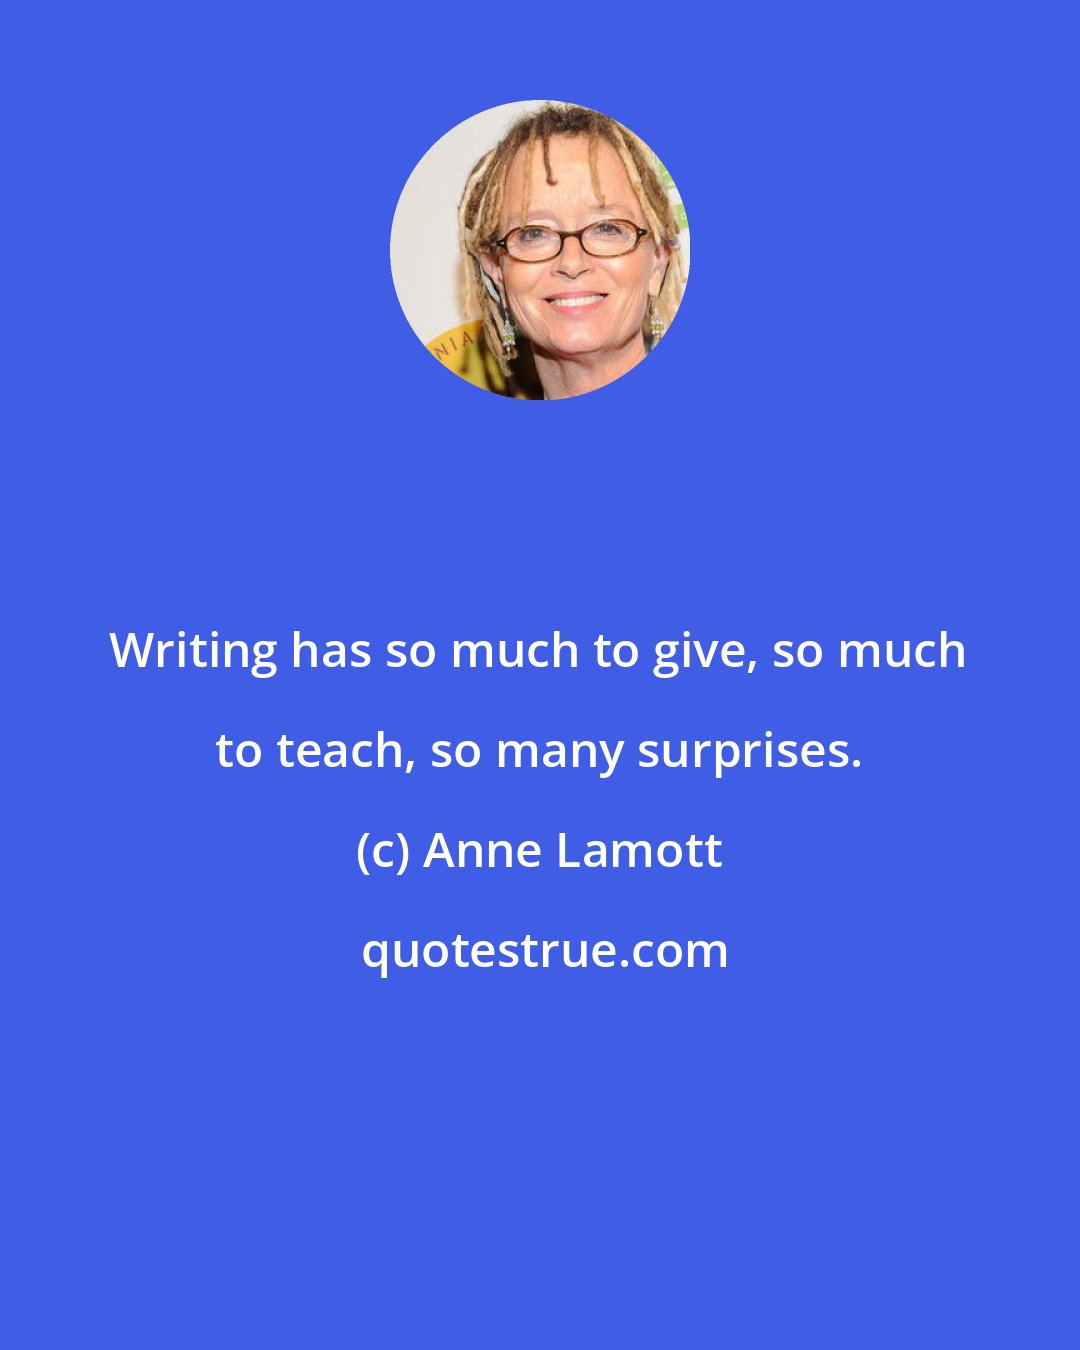 Anne Lamott: Writing has so much to give, so much to teach, so many surprises.